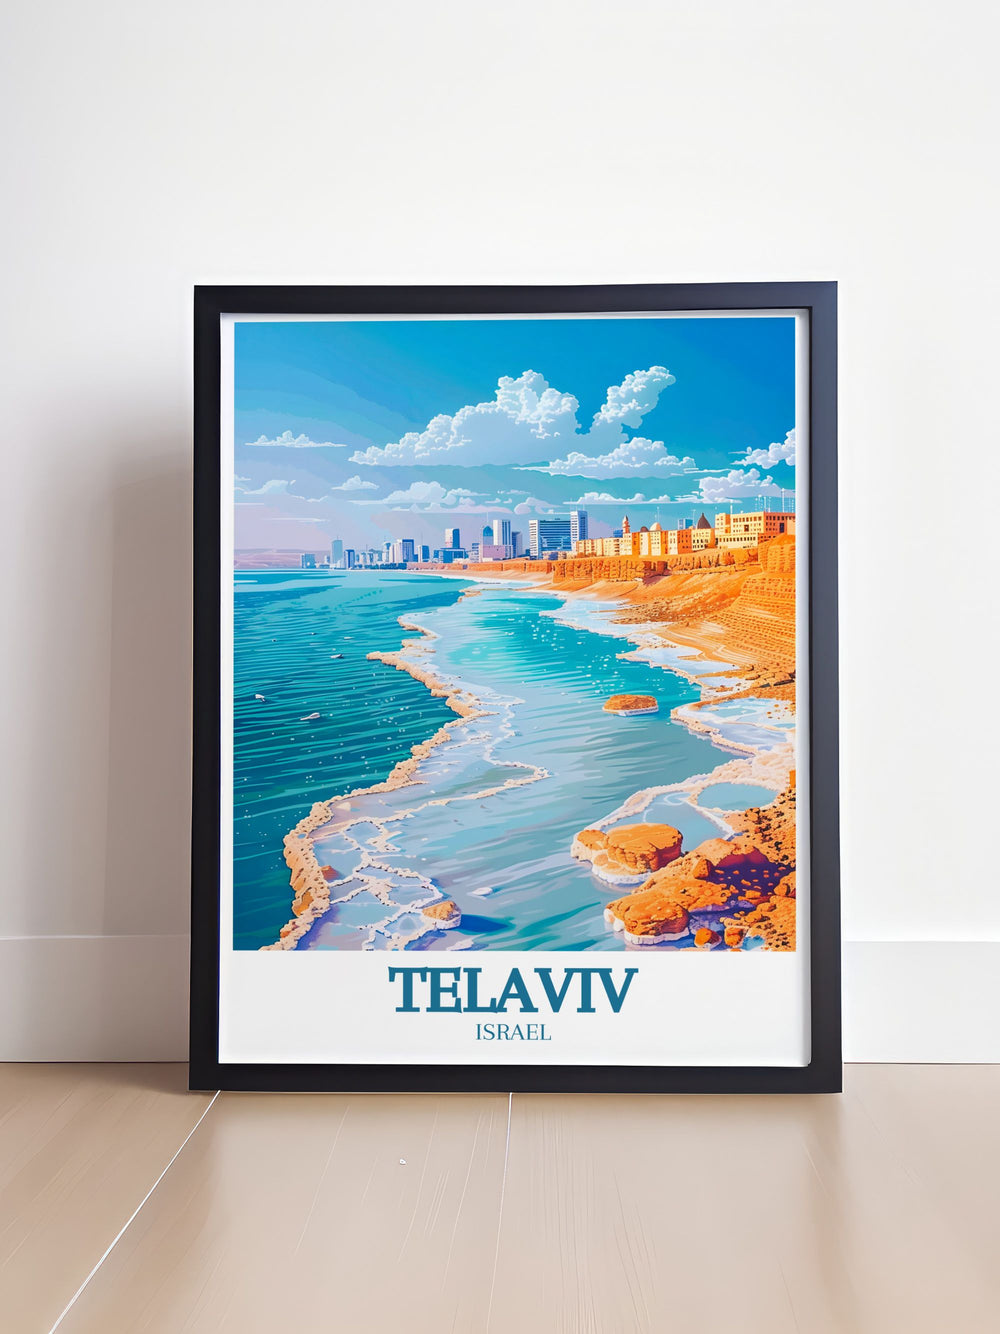 The picturesque Dead Sea in Israel, known for its unique properties and serene beauty, is highlighted in this travel poster. Perfect for those who appreciate natural wonders, this artwork captures the charm of Israels famous salt lake.